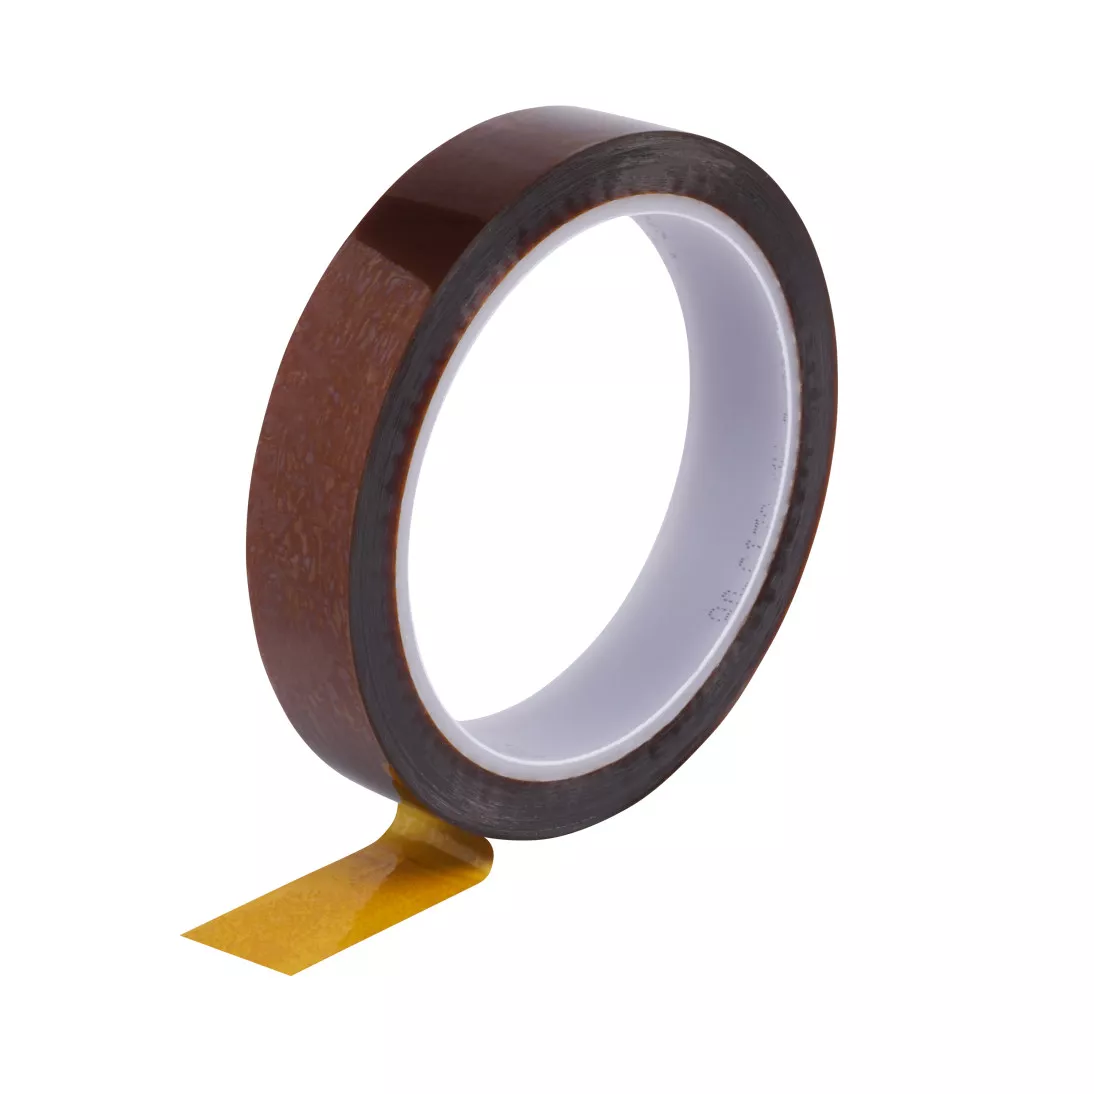 3M™ Polyimide Film Electrical Tape 1205, 12.5 in x 36 yds, Log Roll, 3
in plastic core, 1 Roll/Case